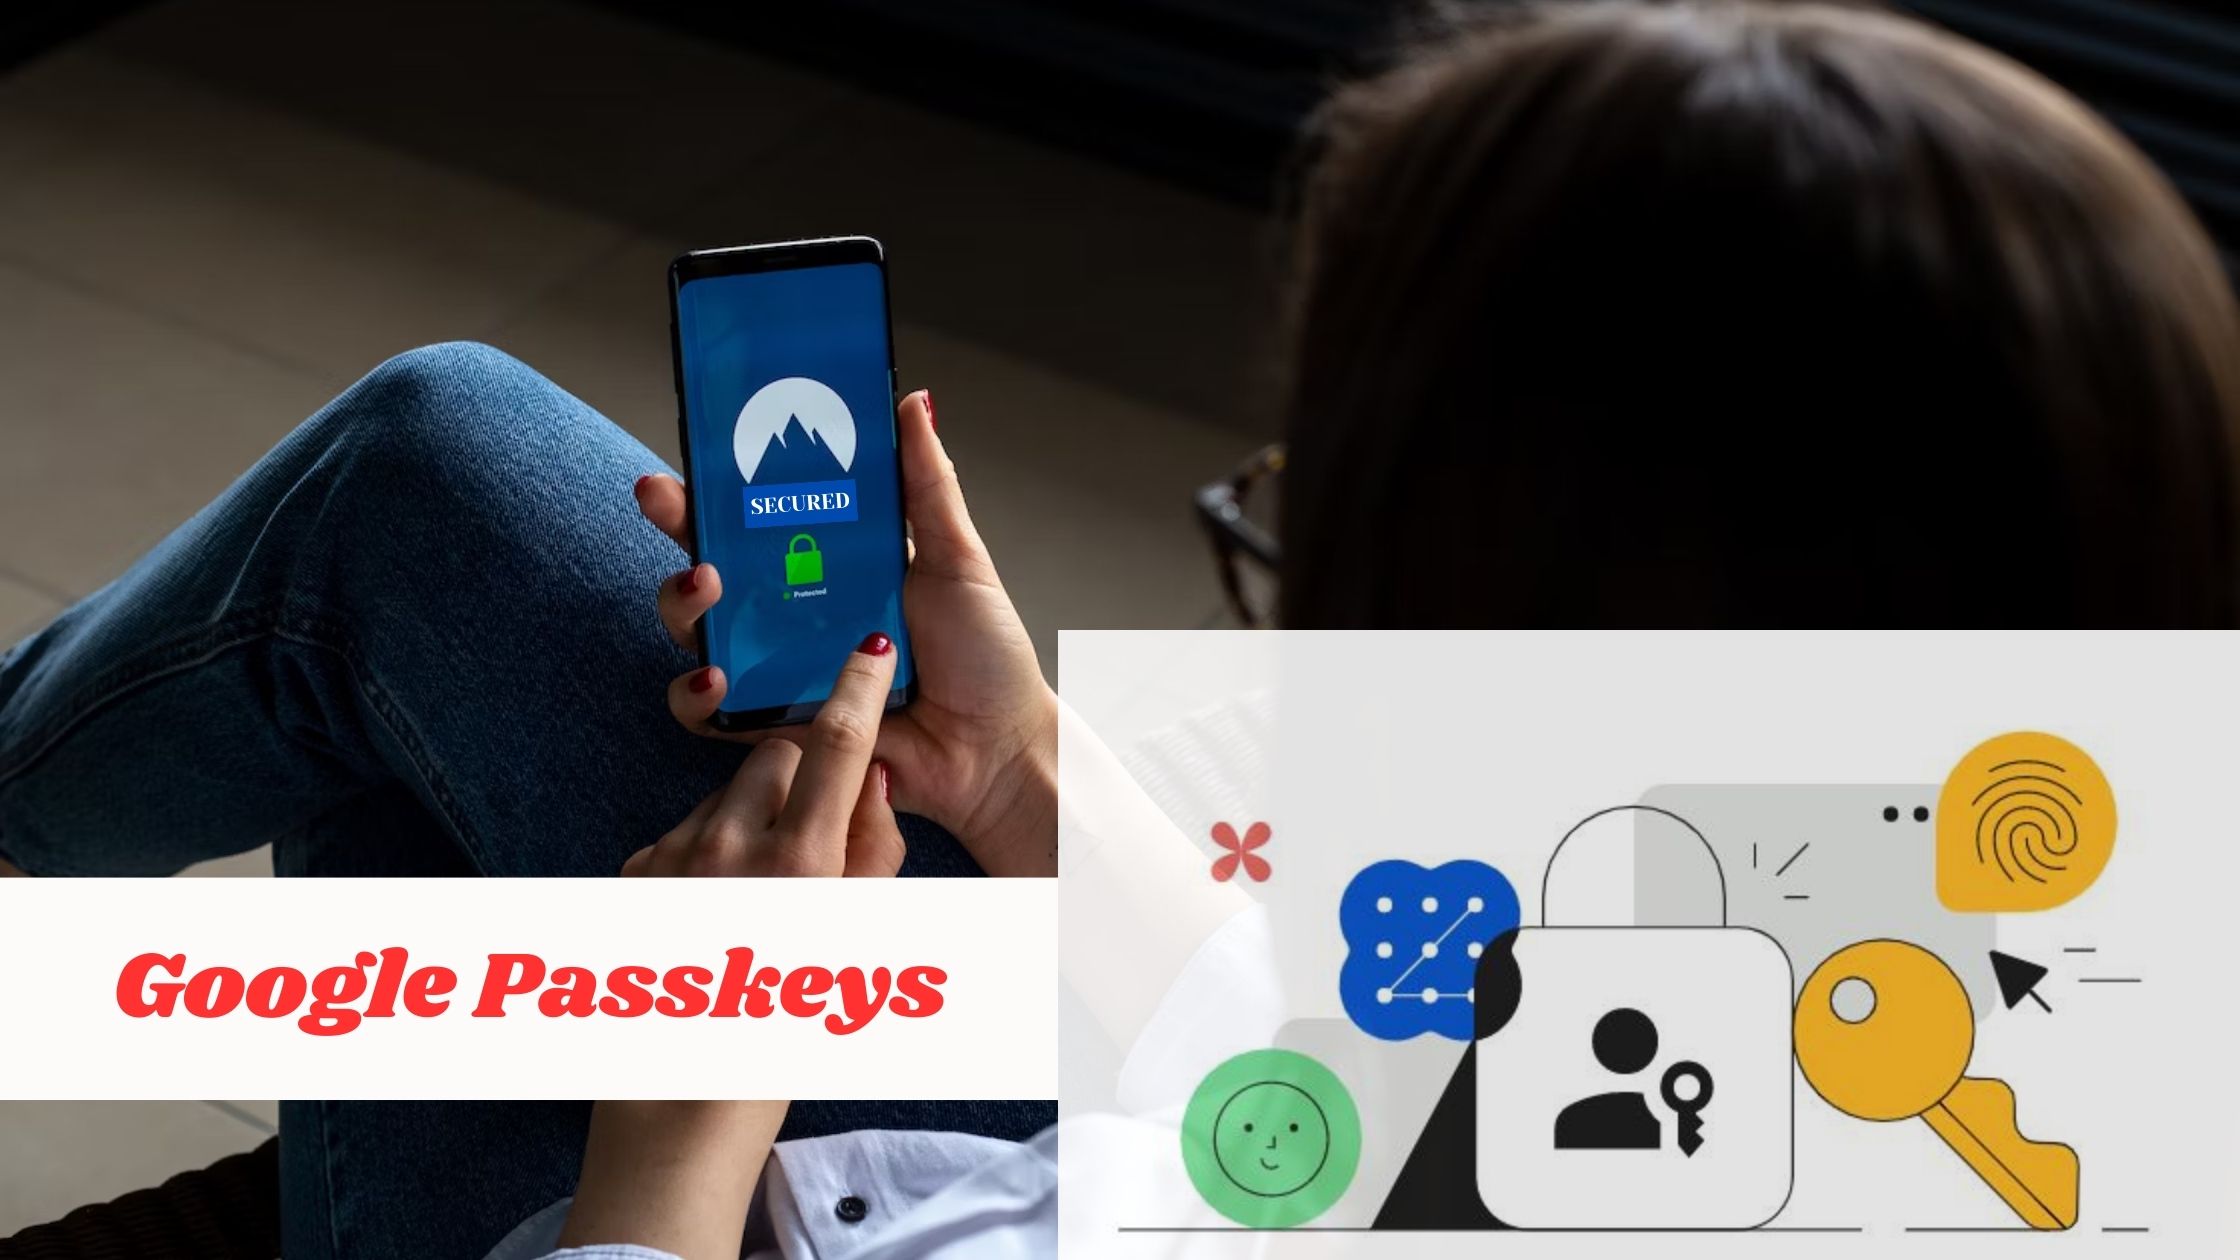 What is passkeys